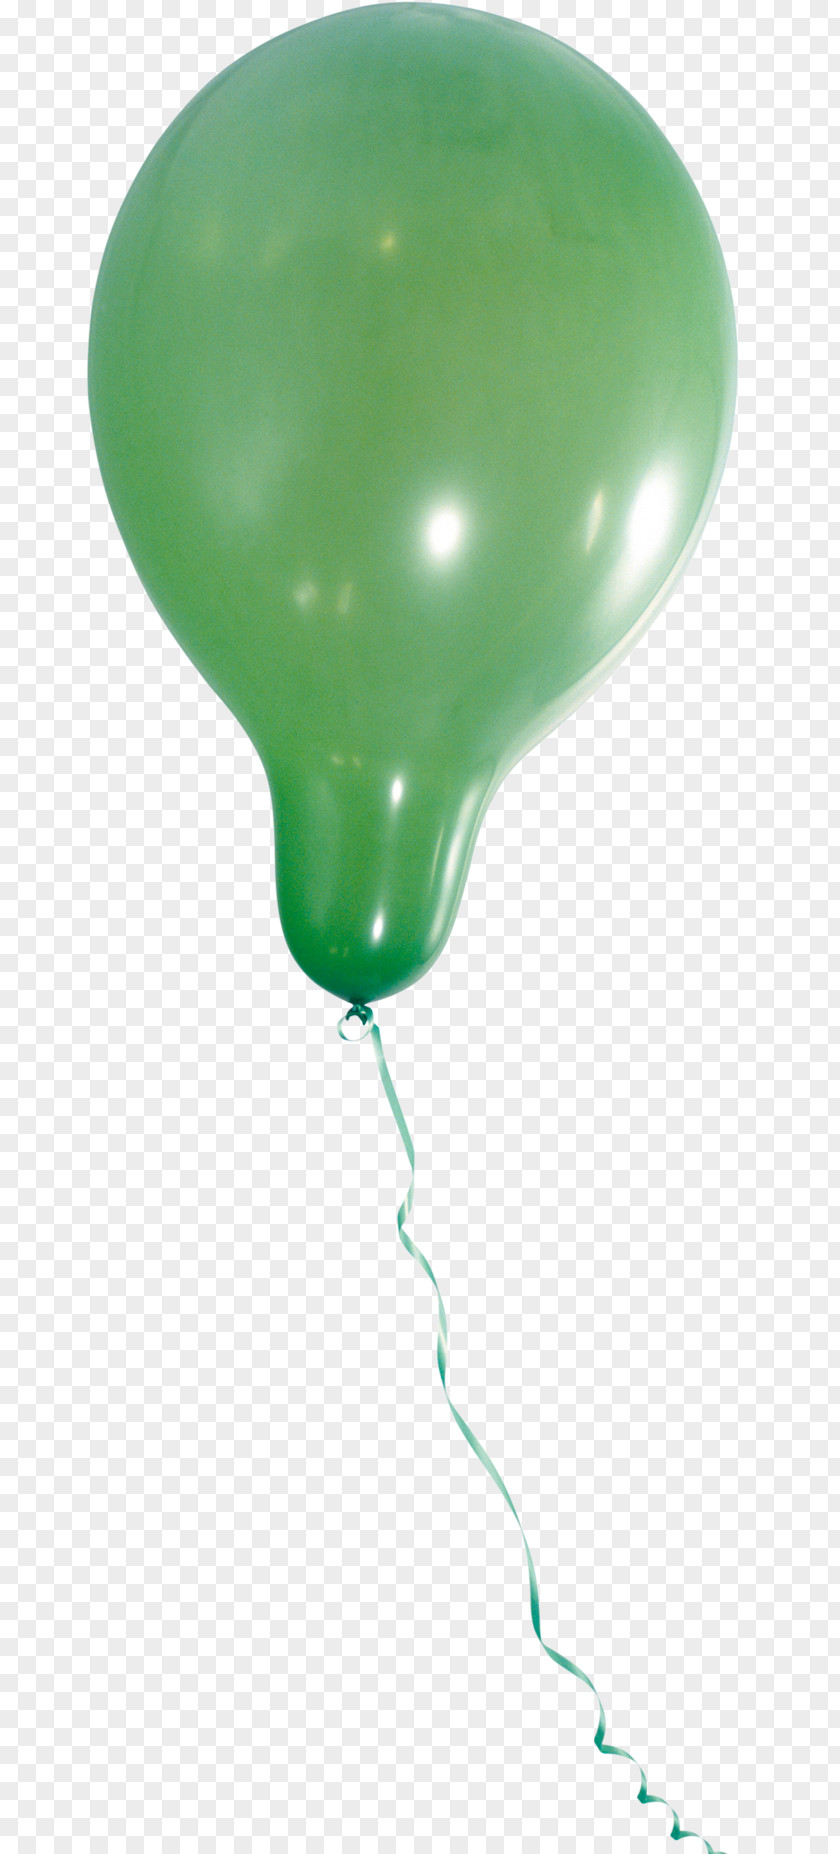 Balloon Toy PNG